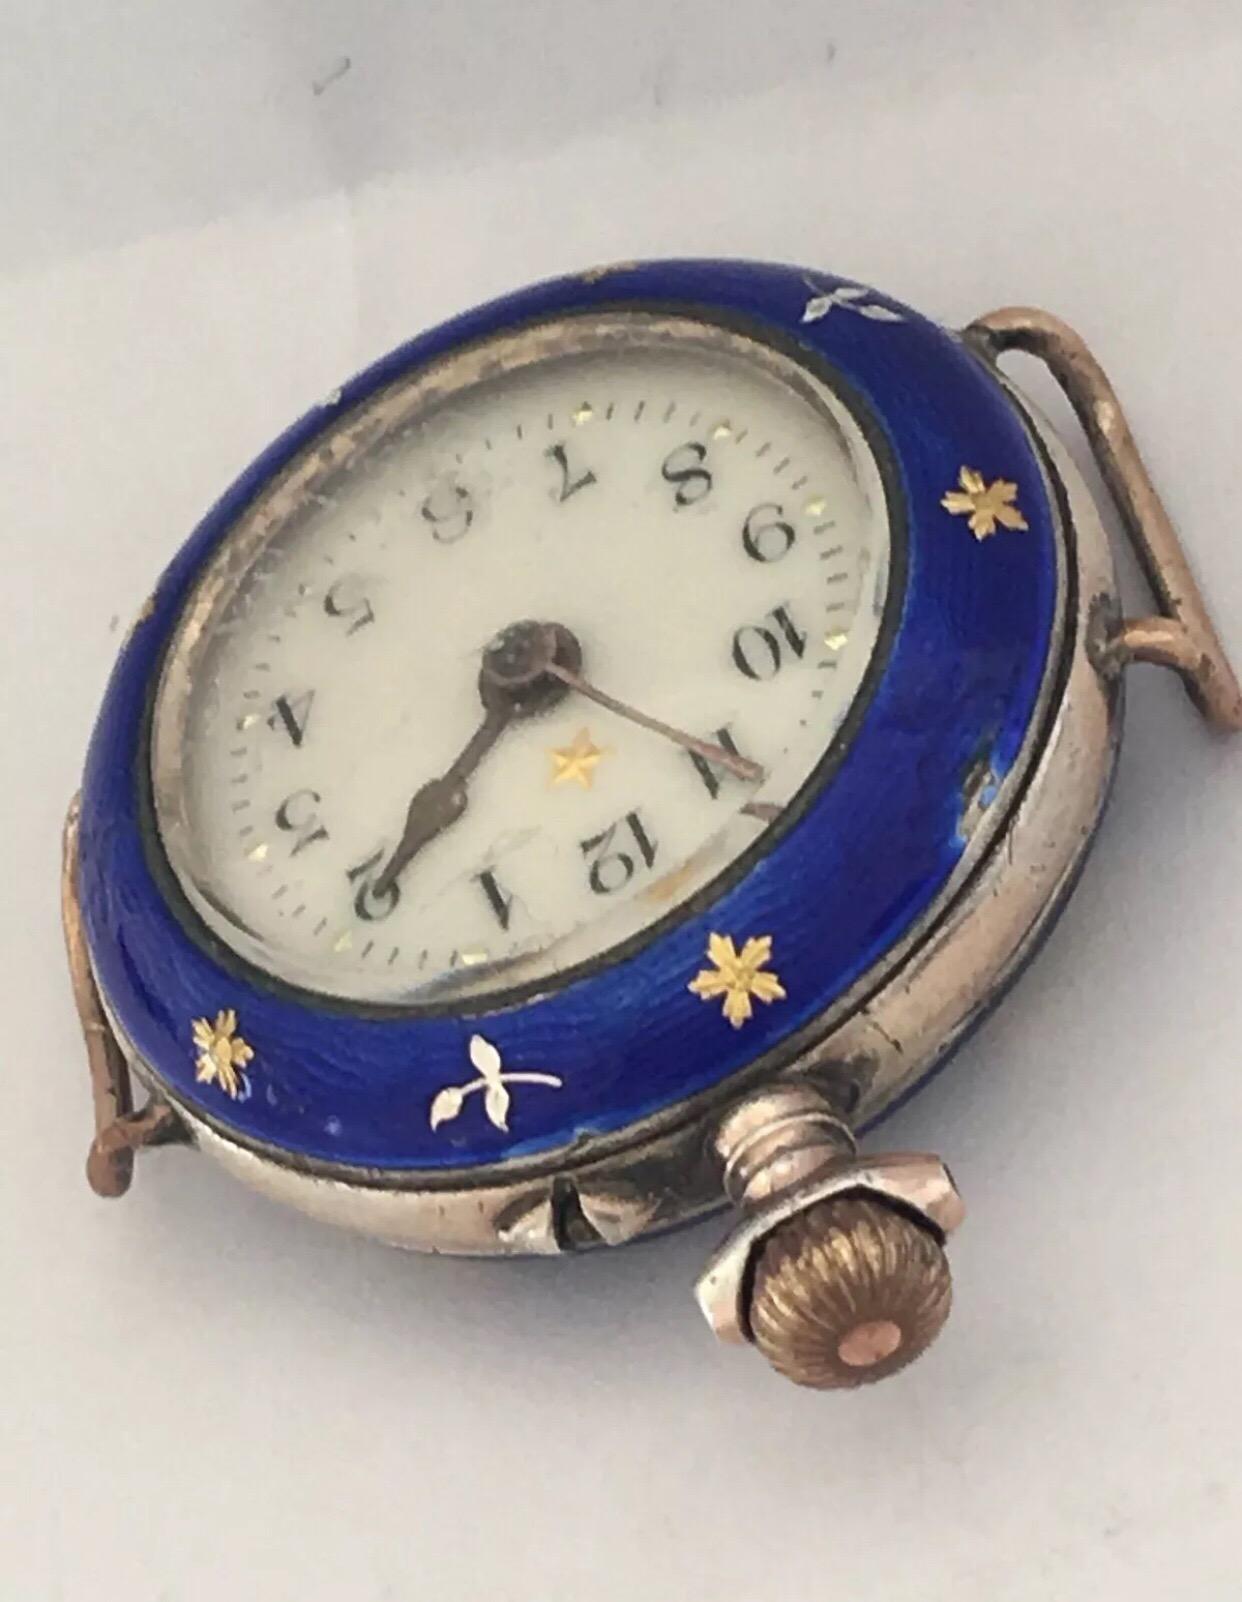 Antique Silver Enamel Swiss Trench Watch In Fair Condition For Sale In Carlisle, GB